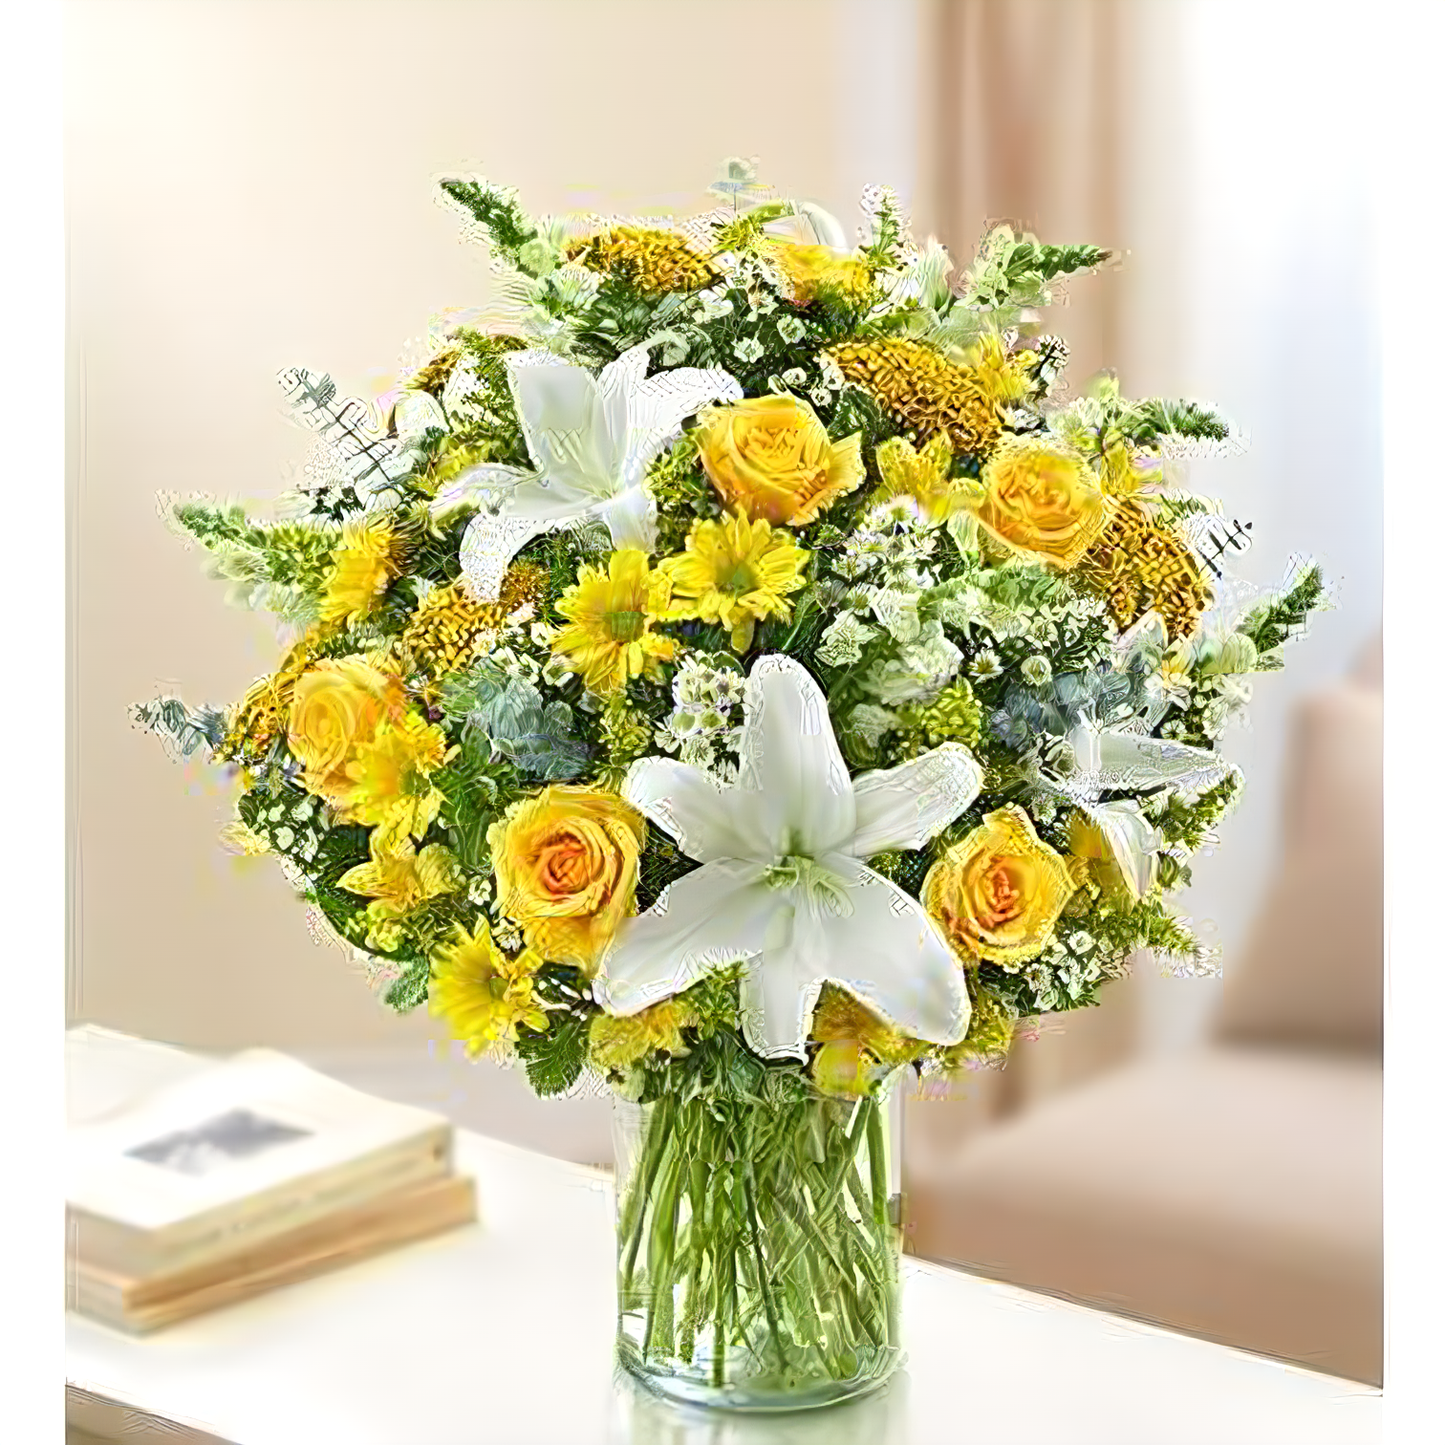 Sincerest Sorrow - Yellow and White - Funeral > Vase Arrangements